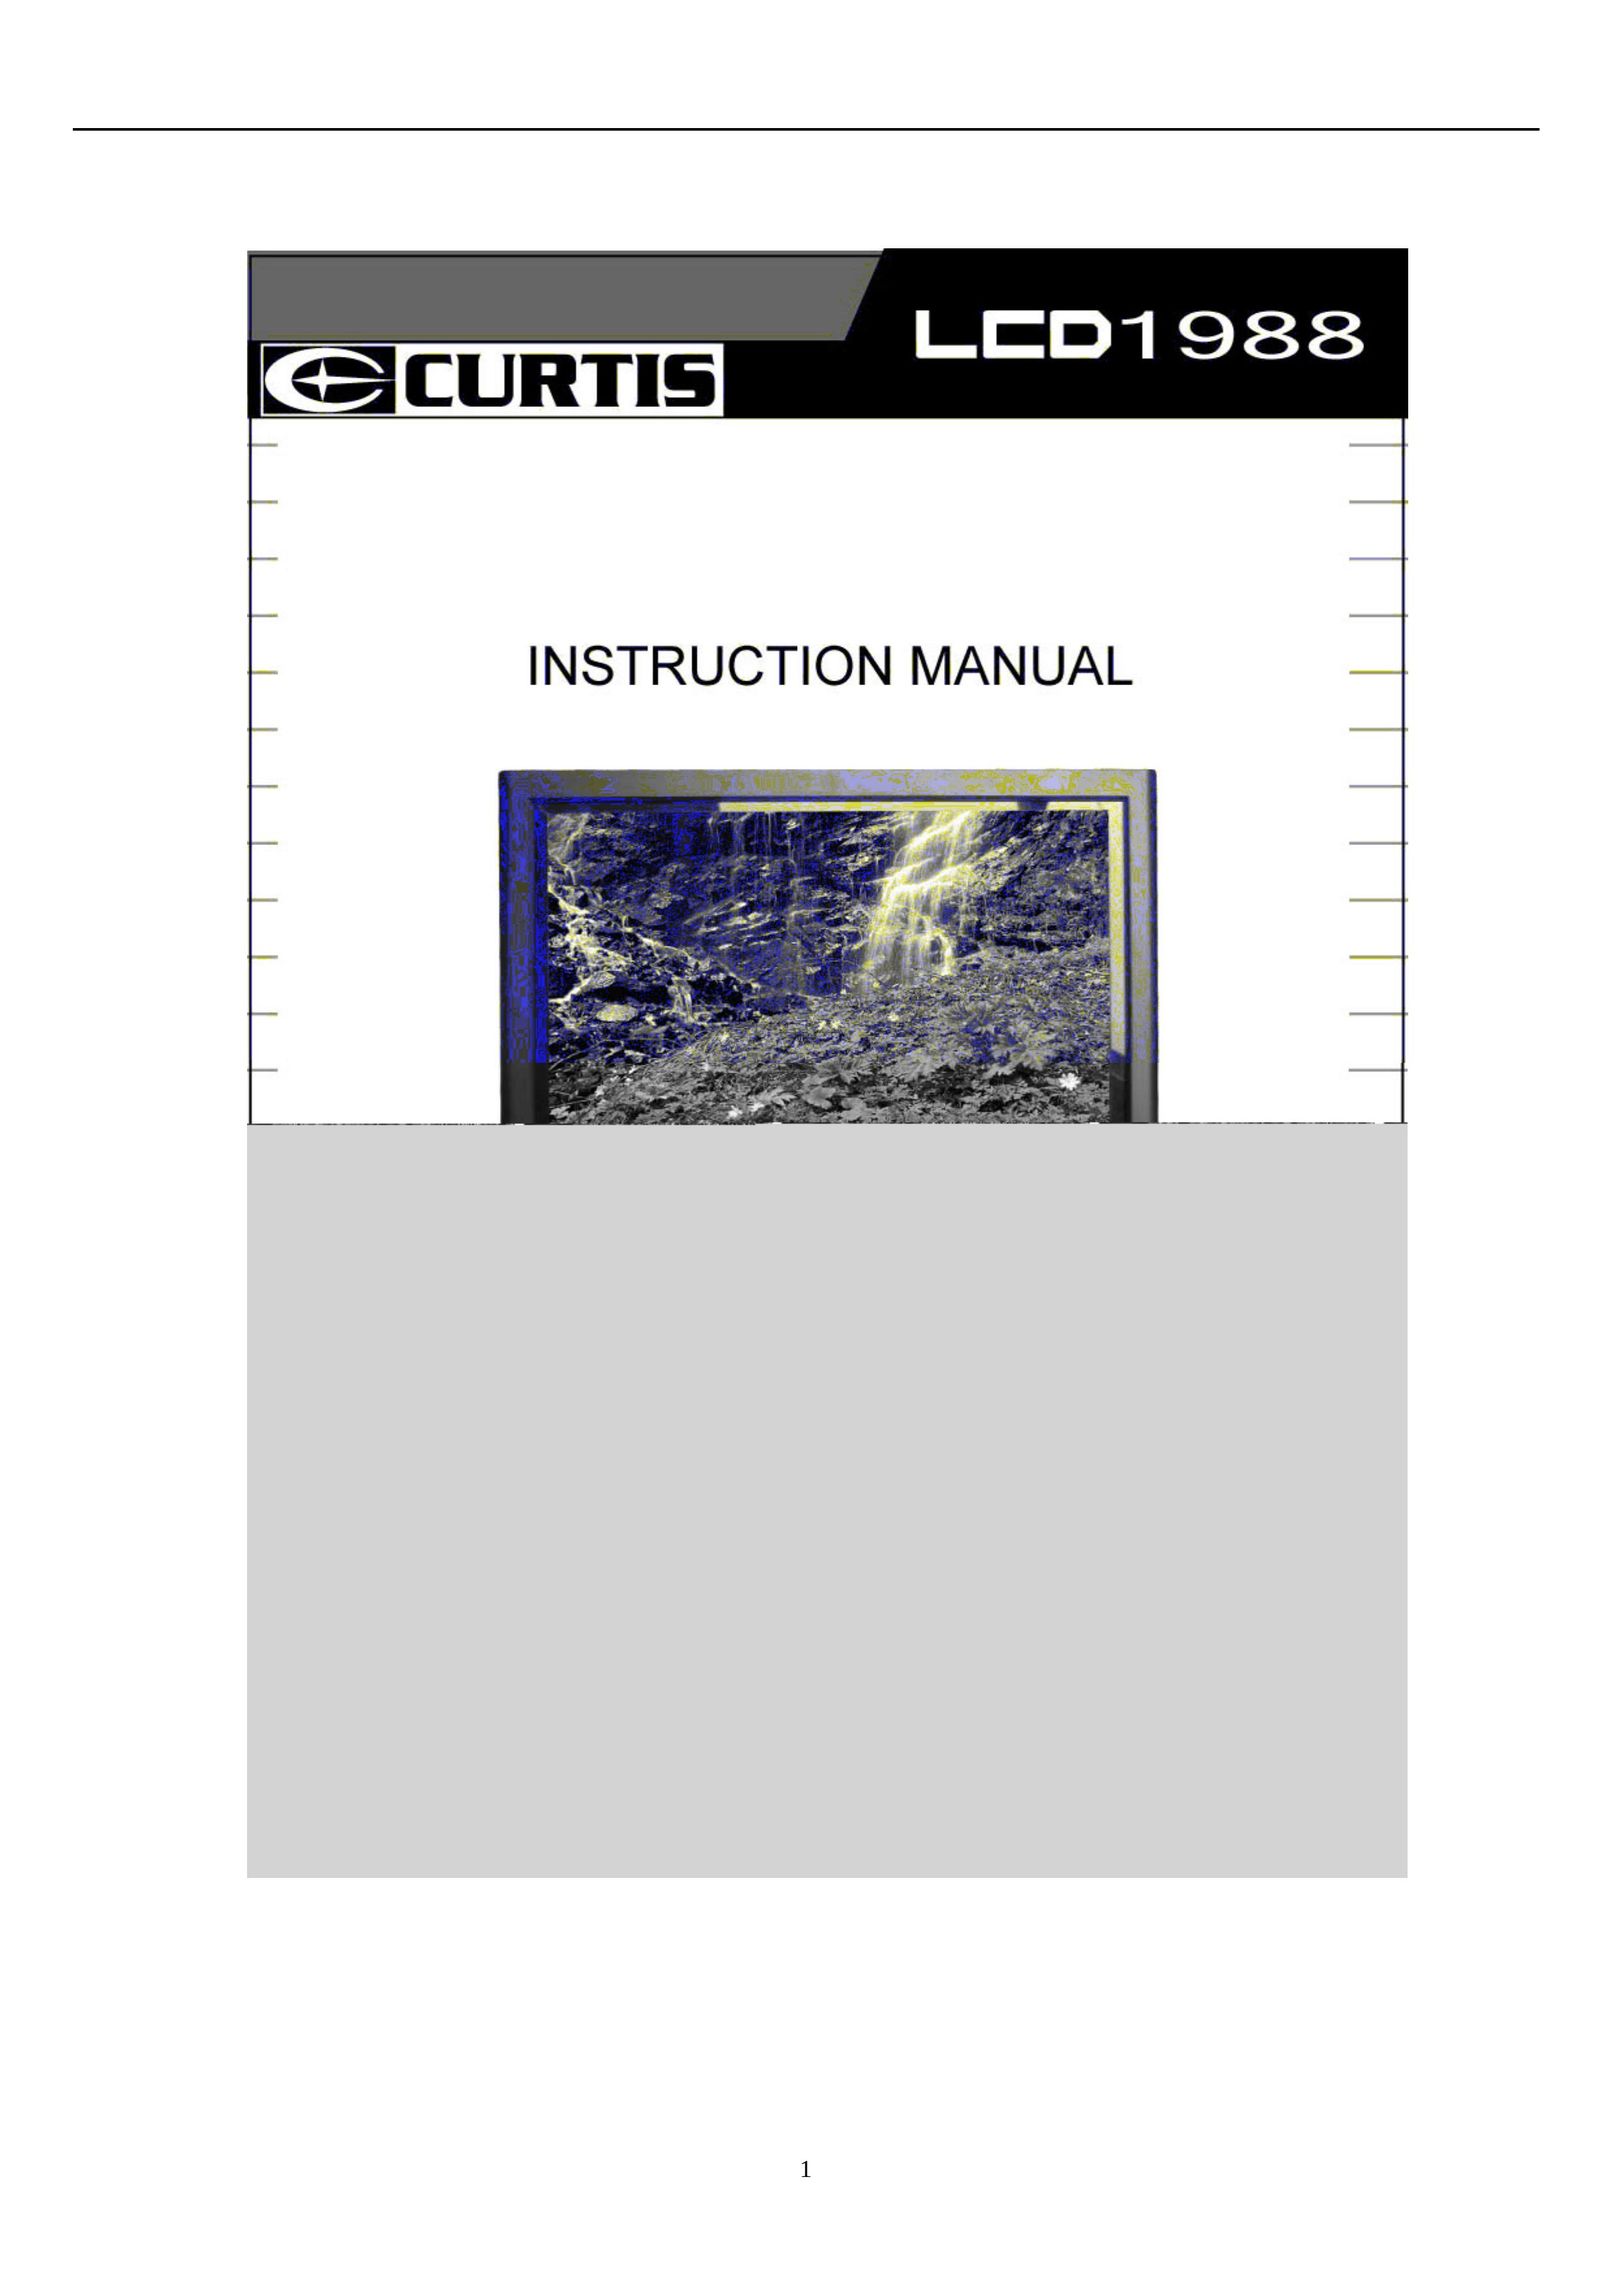 Curtis LCD1988 Flat Panel Television User Manual